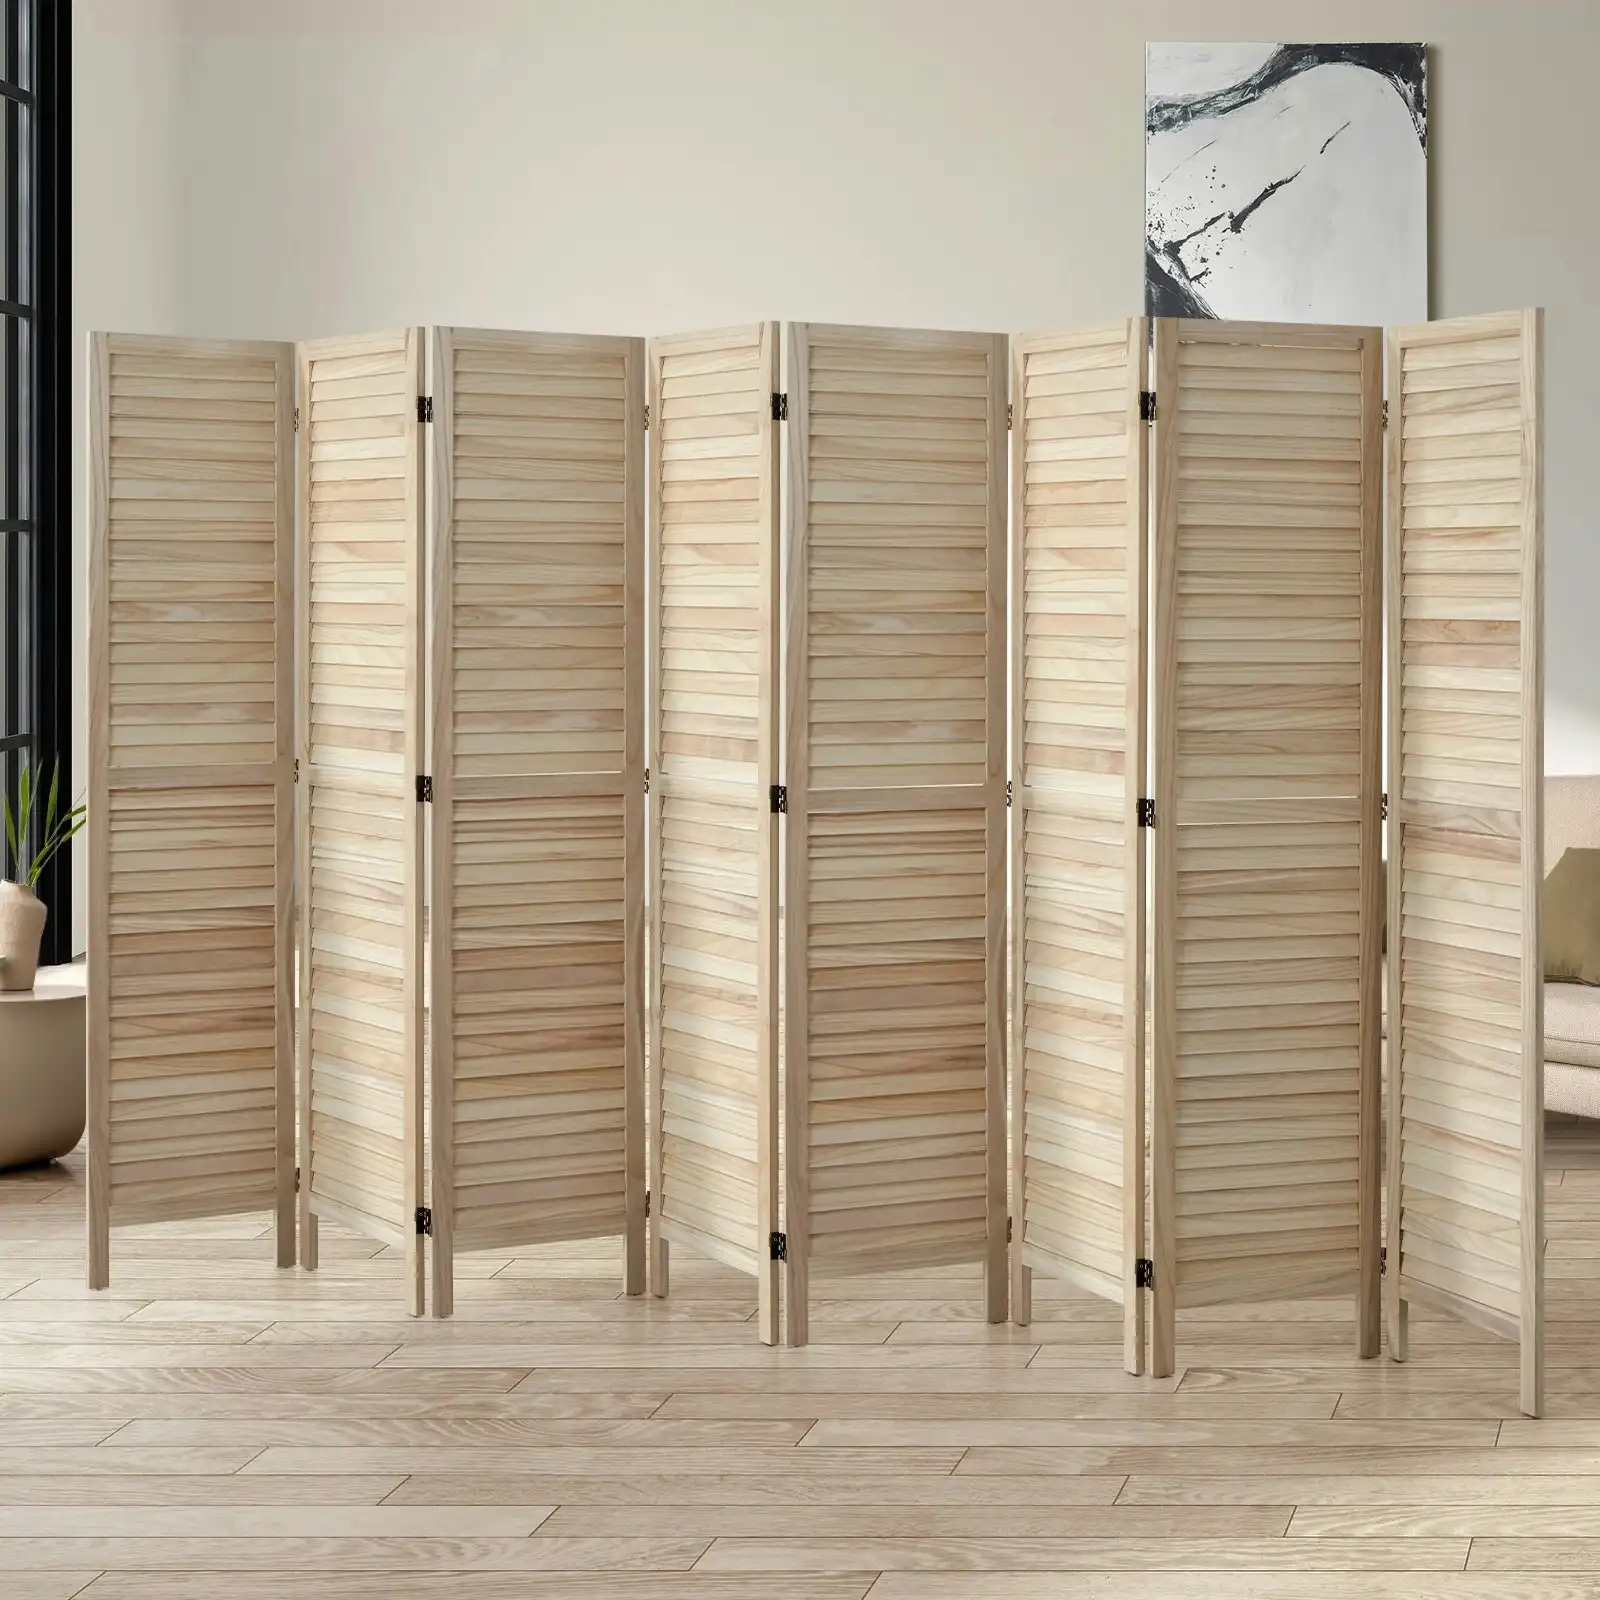 Oikiture 8 Panel Room Divider Privacy Screen Partition Timber Wooden Natural